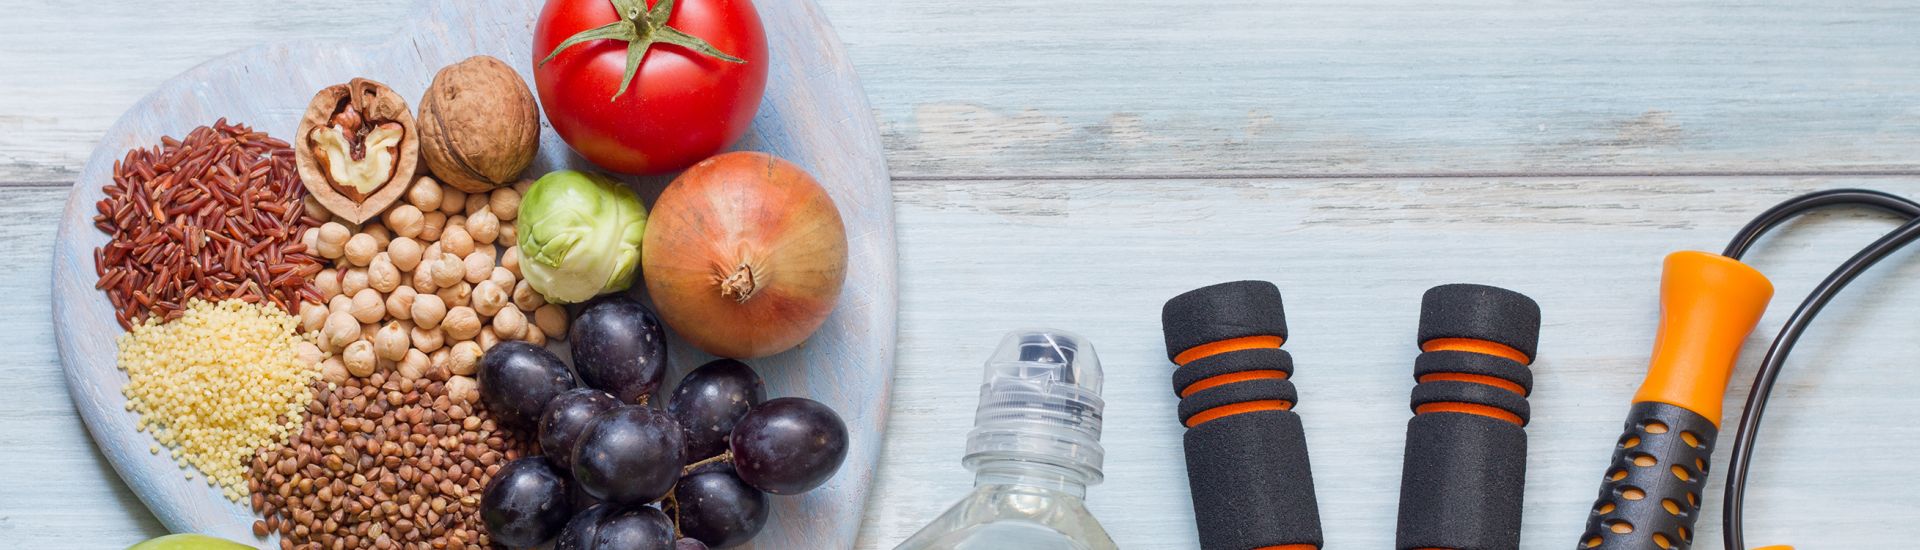 Healthy foods next to a bottle of water and exercise equipment